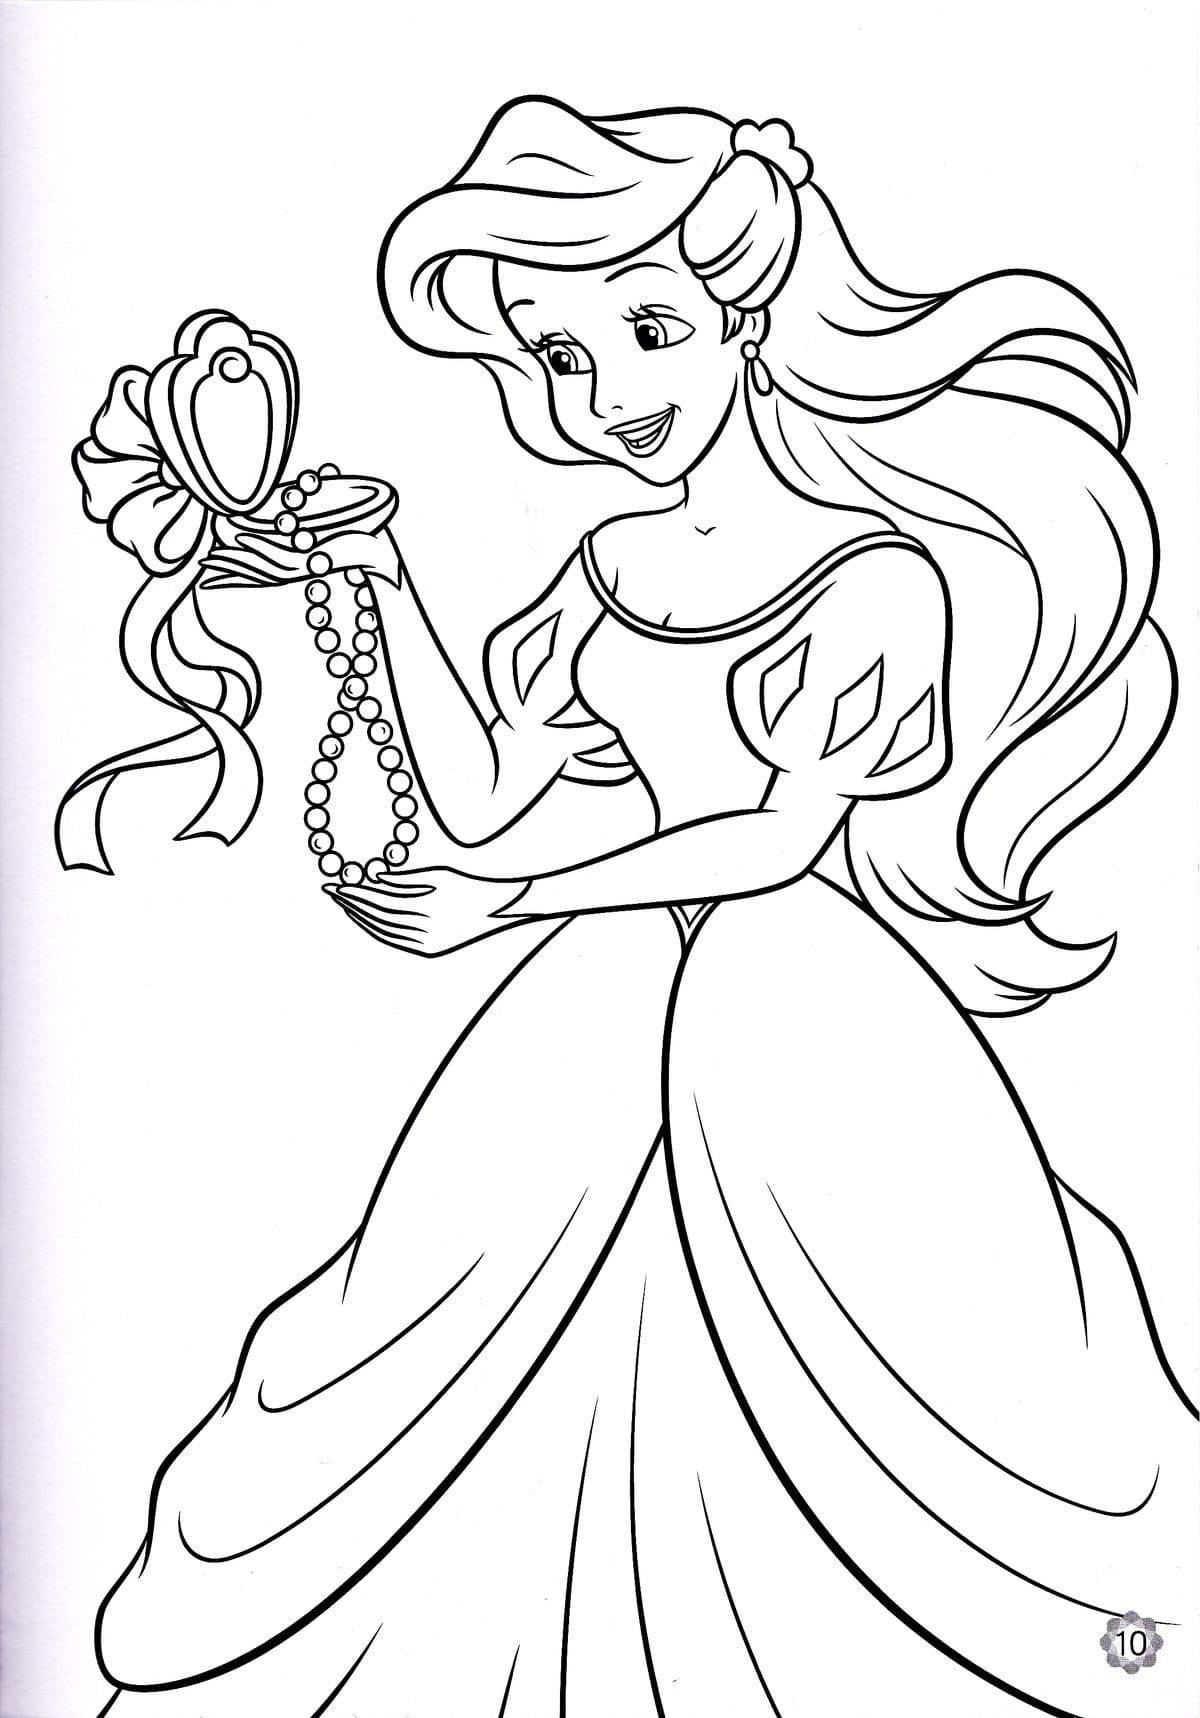 Princess sublime coloring book for kids 5-6 years old